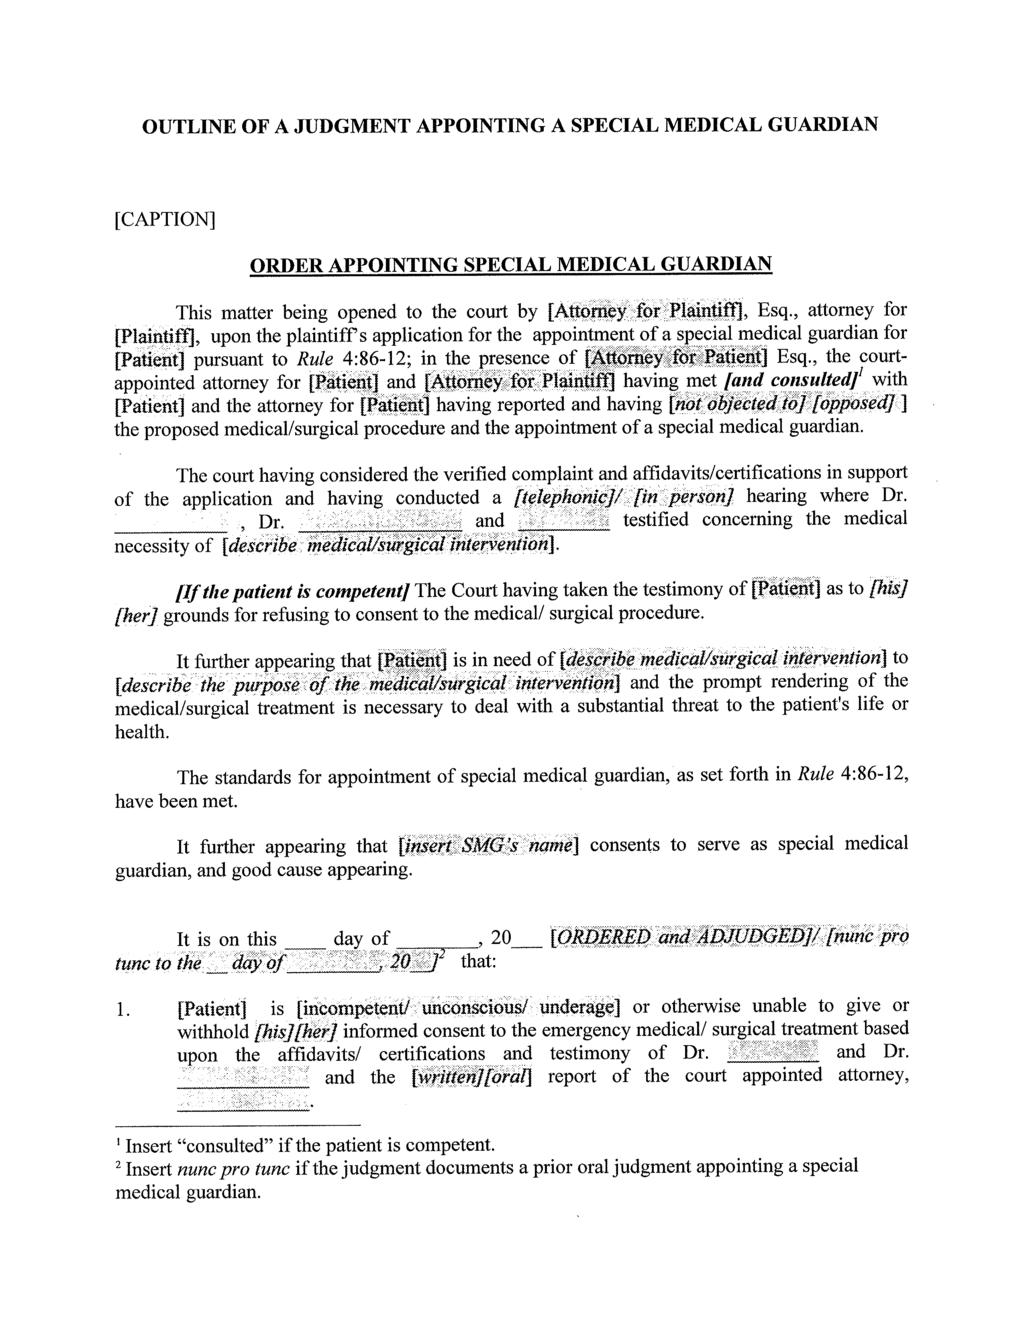 OUTLINE OF A JUDGMENT APPOINTING A SPECIAL MEDICAL GUARDIAN [CAPTION] ORDER APPOINTING SPECIAL MEDICAL GUARDIAN This matter being opened to the court by [Attorney for PlaintiffJ, Esq.